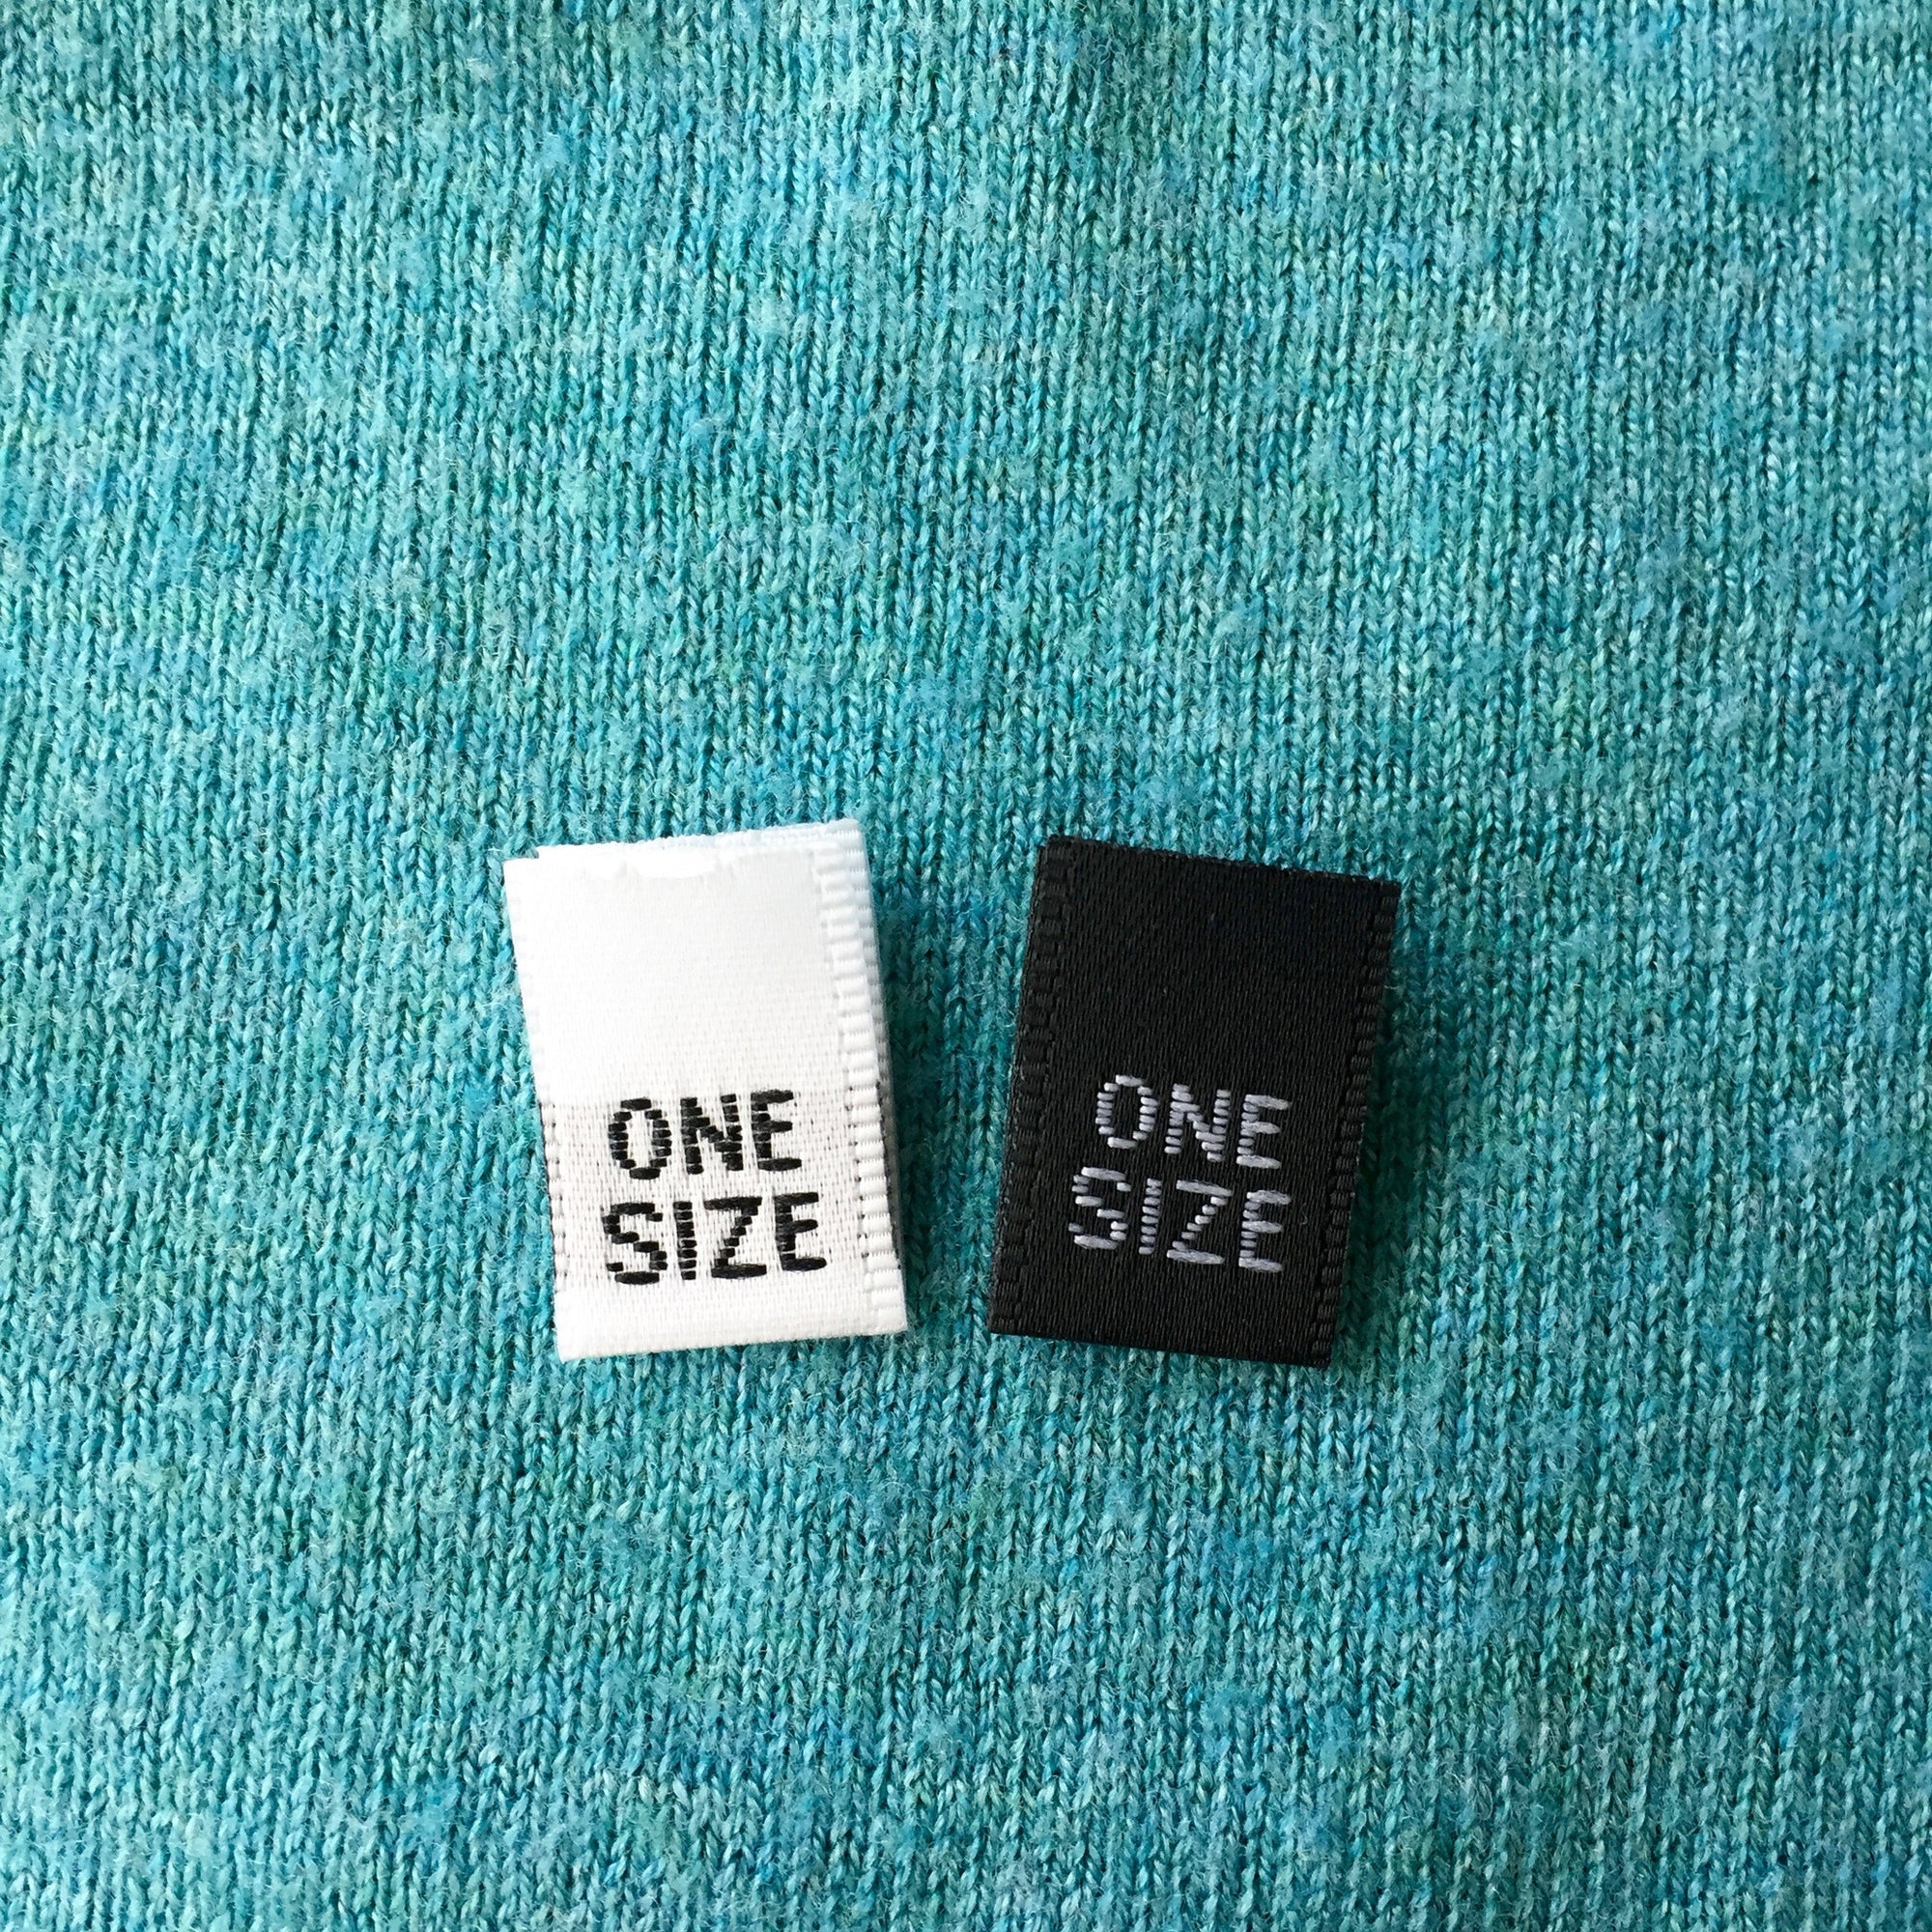 One Size - Clothing Labels (Satin)